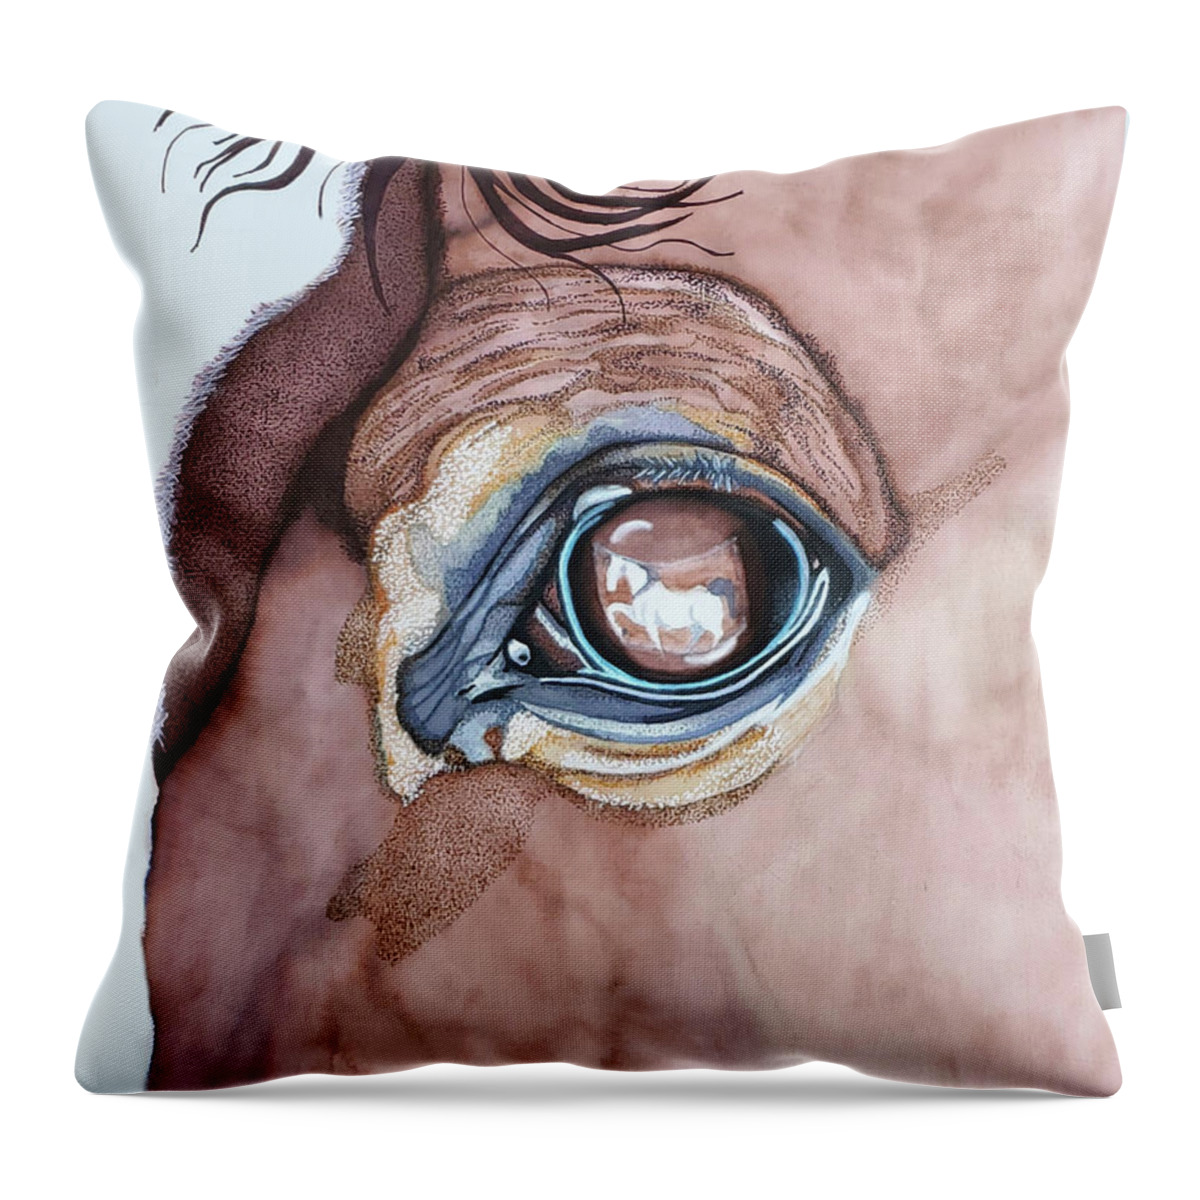 Horse Eye Throw Pillow featuring the painting Reflections Horse Eye by Equus Artisan